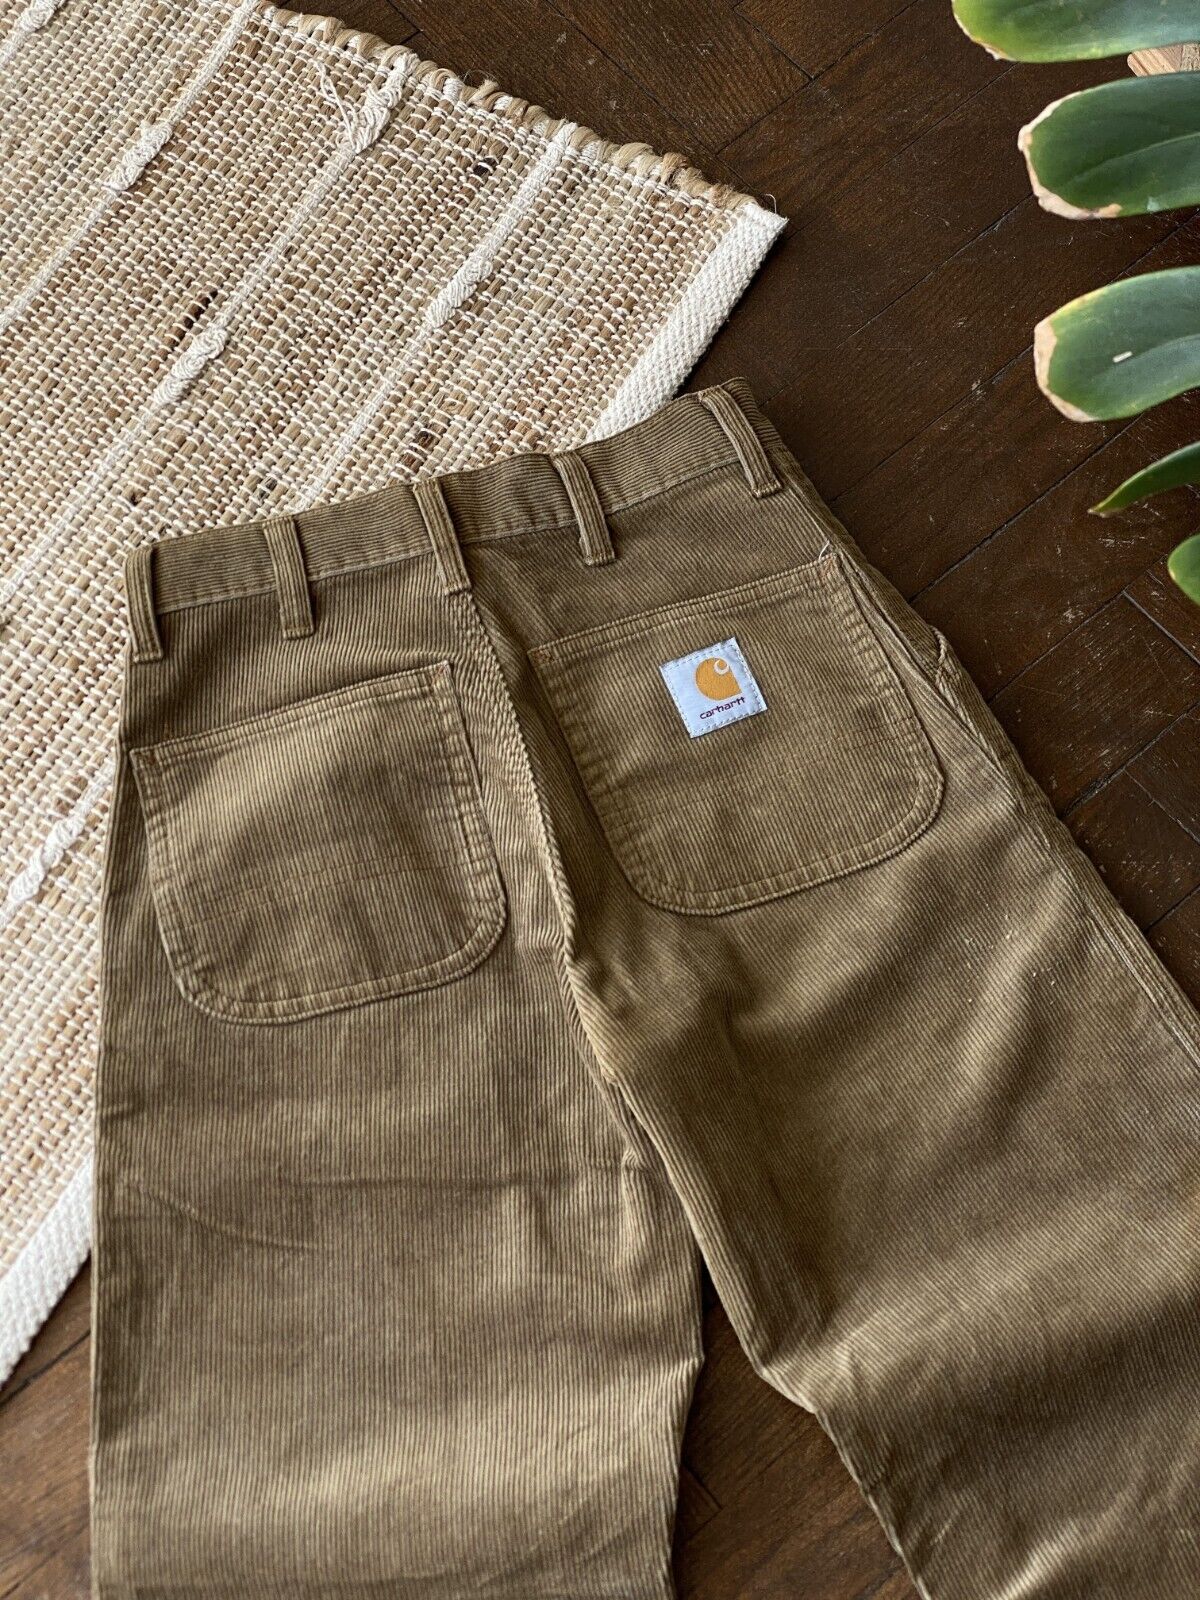 Picture 1 of 10 Vintage Women's Carhartt Simple Corduroy Work Pants Brown Size 27